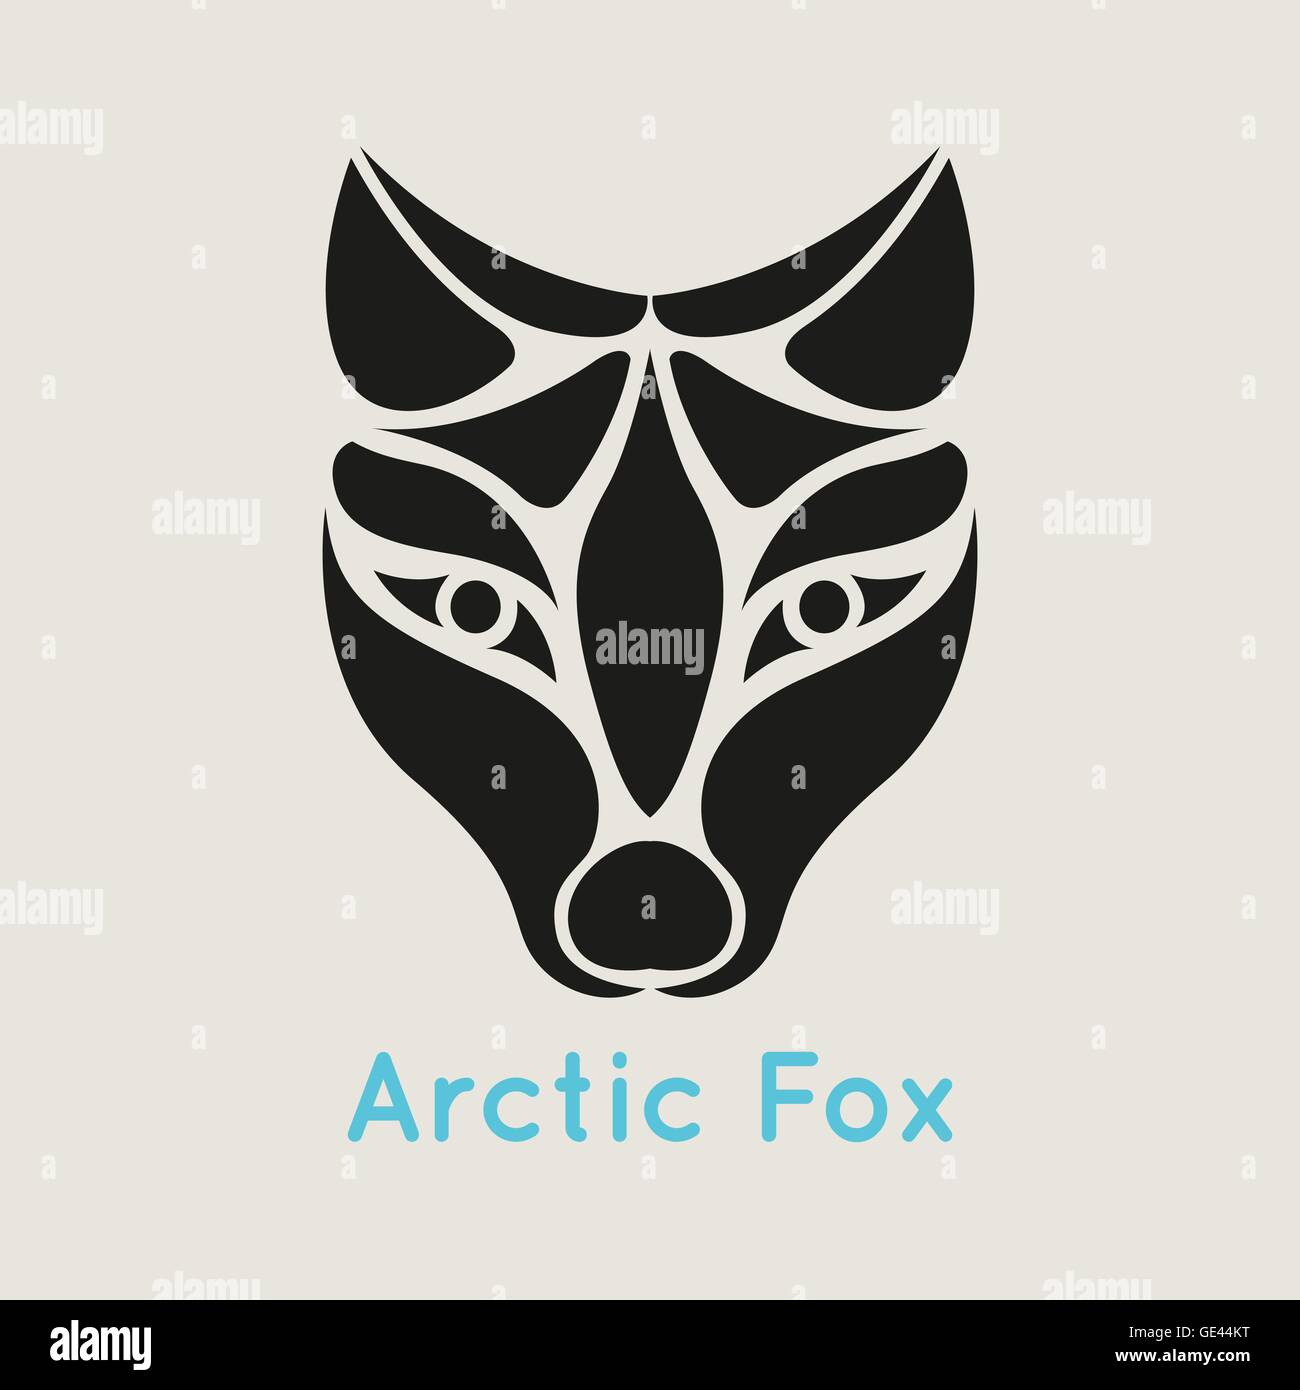 Arctic Fox Logo Vector Art, Icons, and Graphics for Free Download